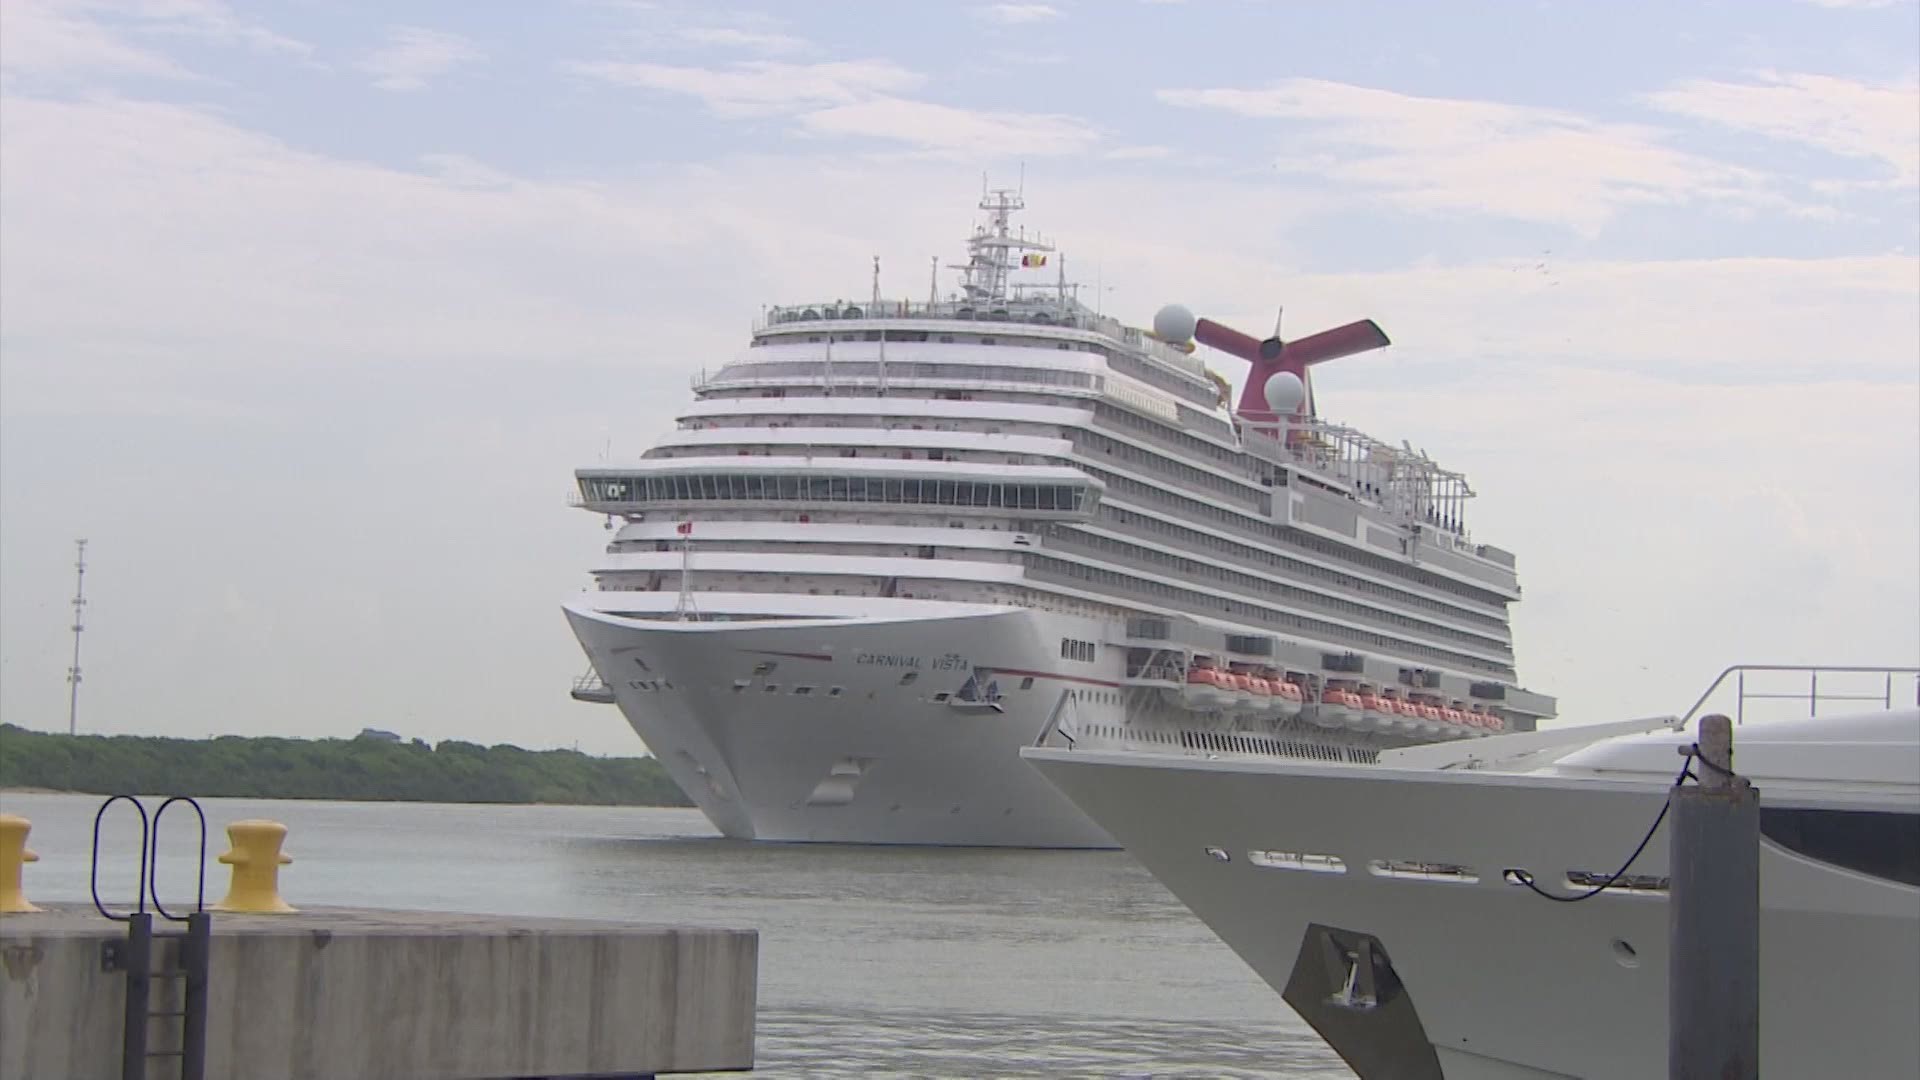 After its first voyage since the start of the pandemic Carnival Vista is back in Galveston.